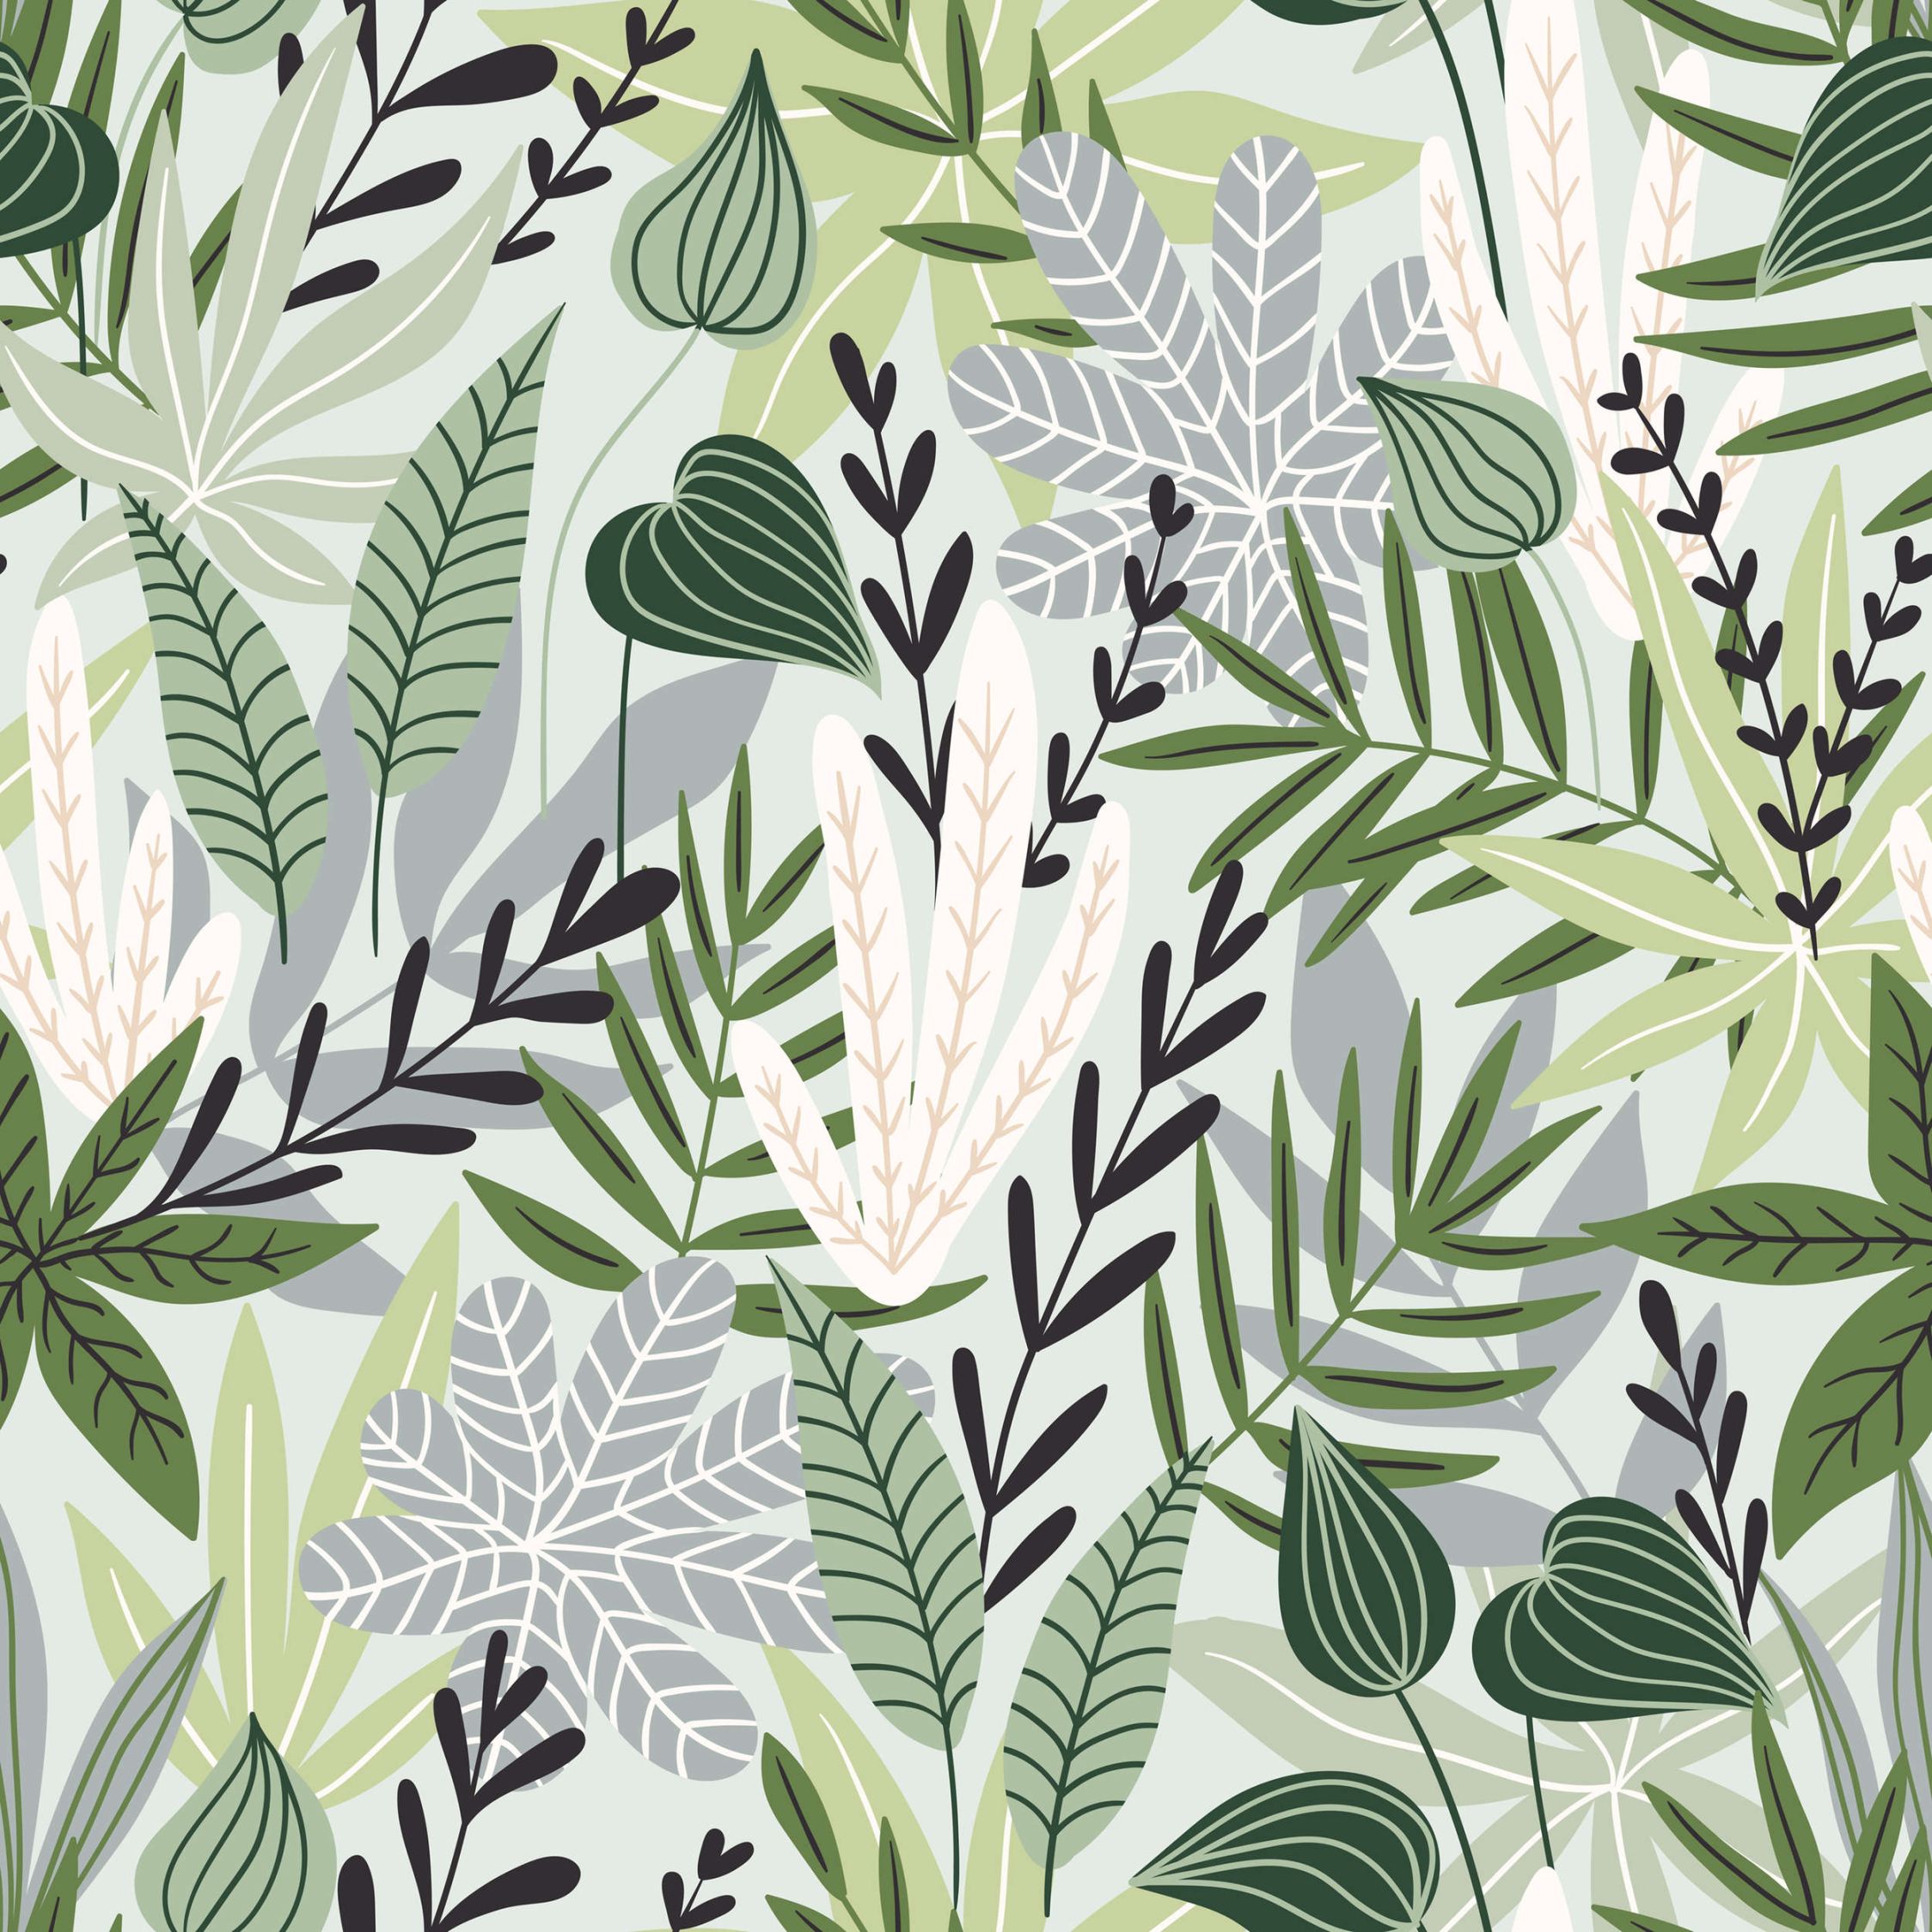             Comic Strip Style Leaves and Grasses Wallpaper - Smooth & Pearlescent Non-woven
        